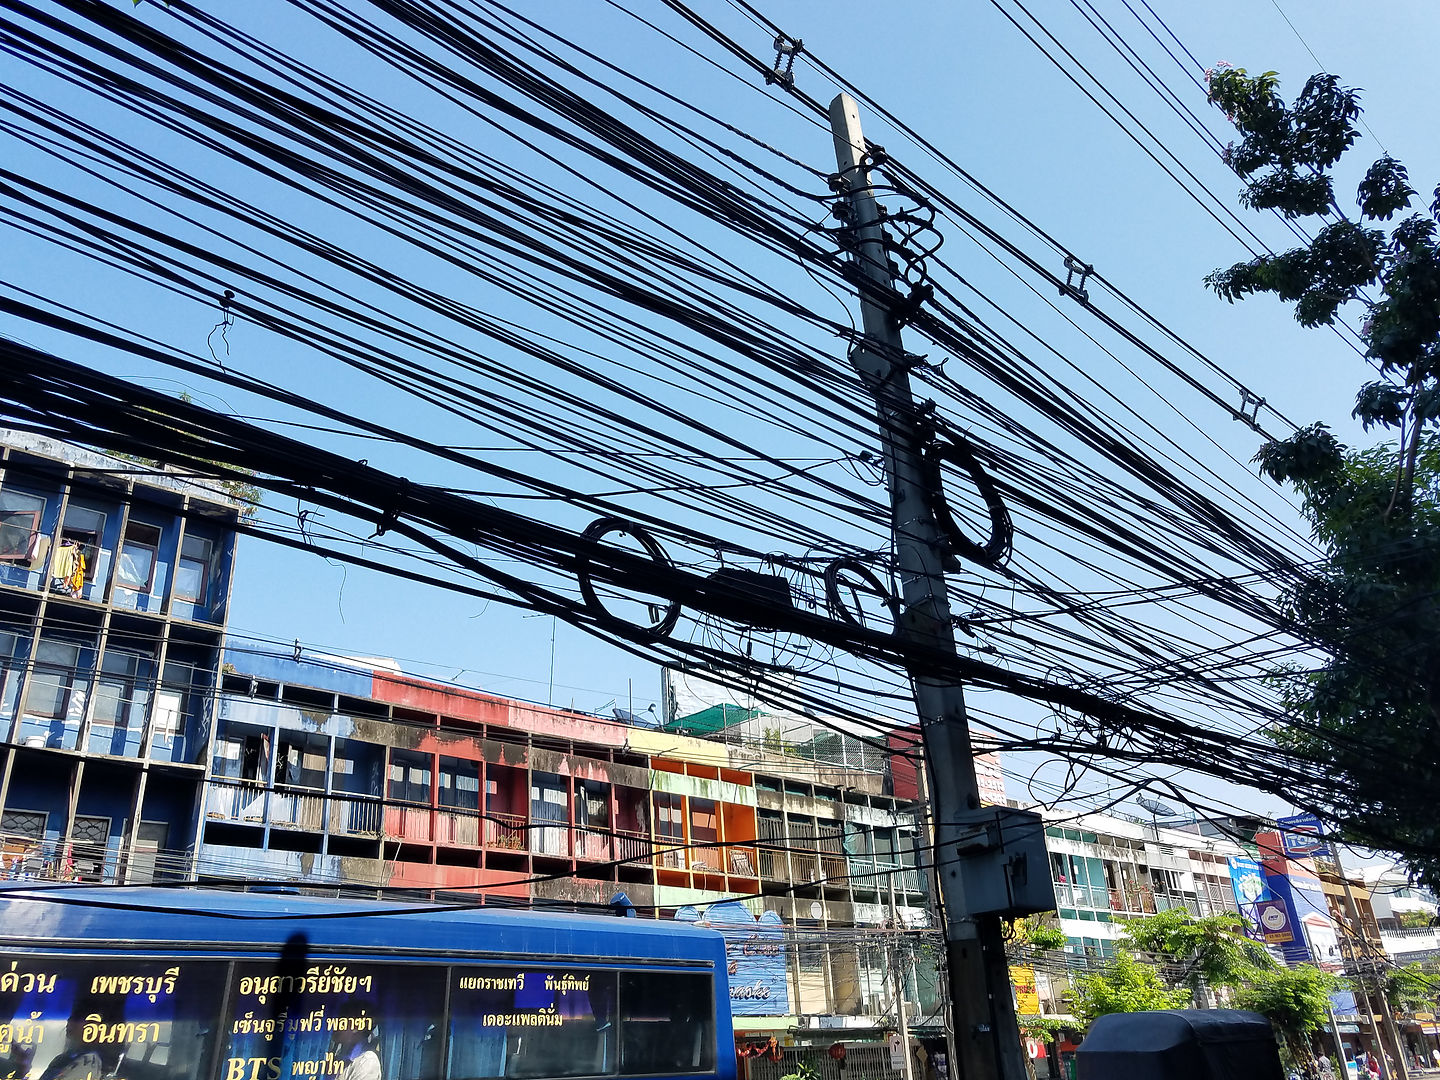 Typical electrical wiring in Thailand